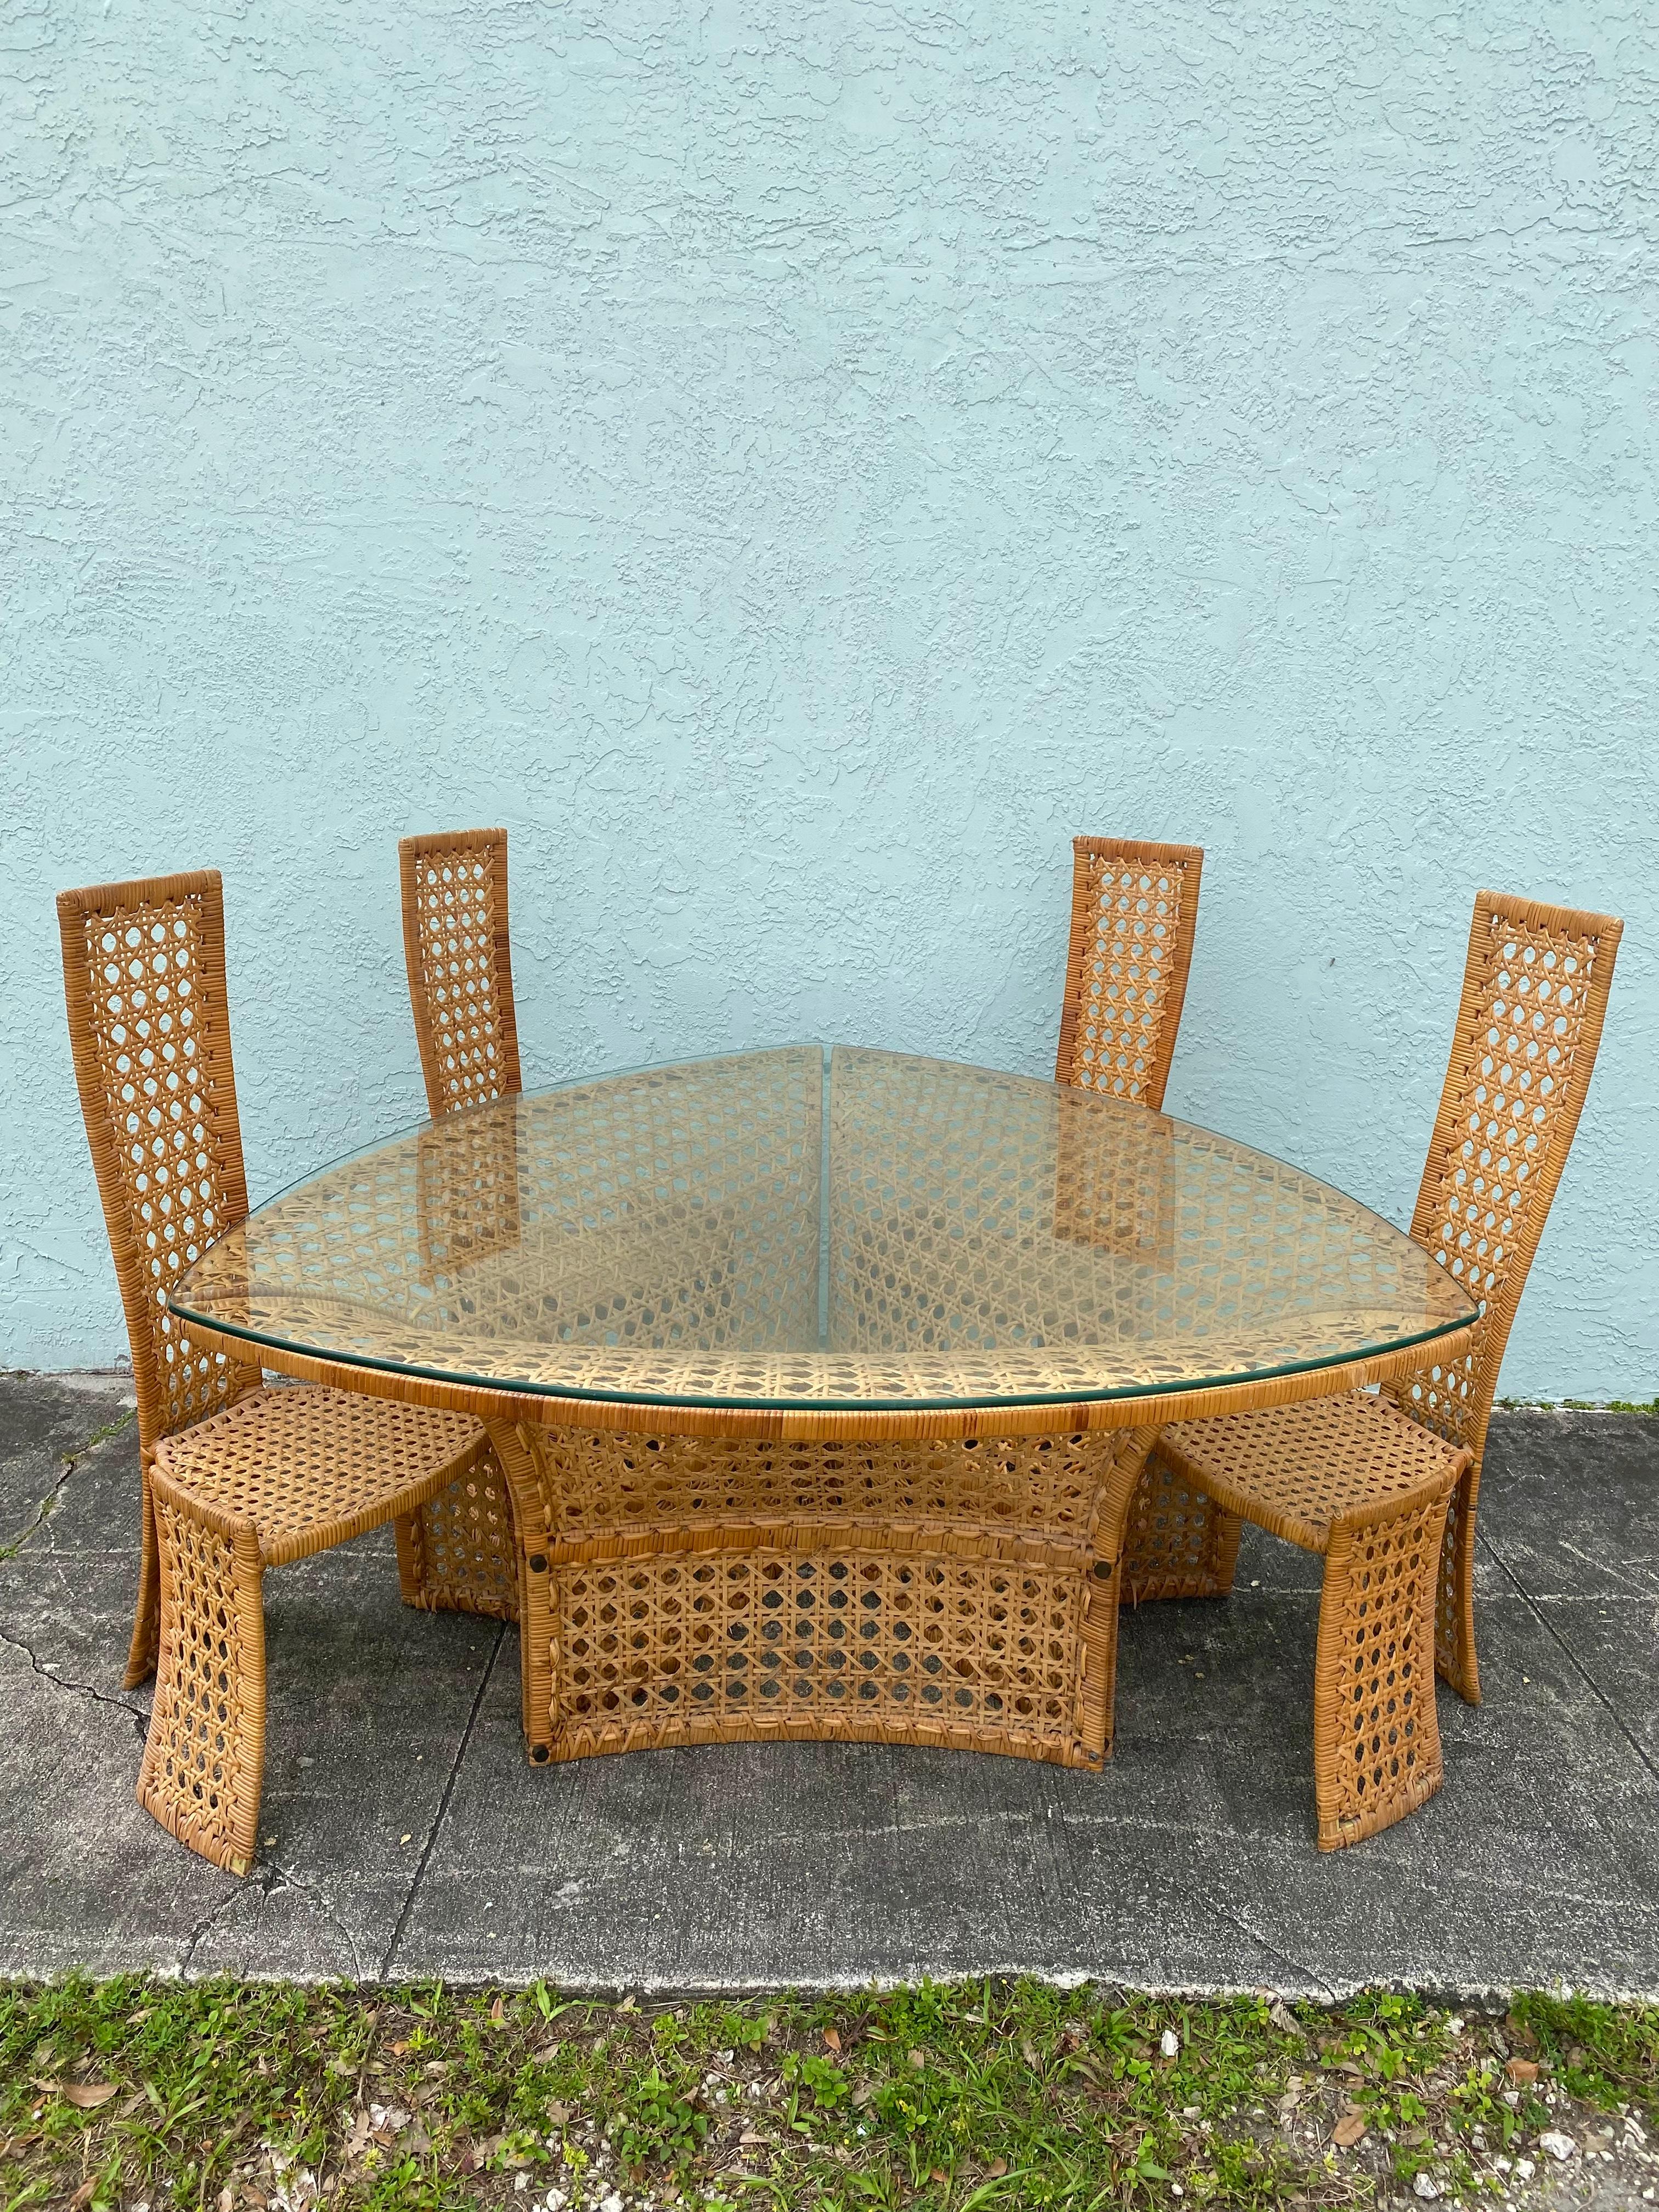 On offer on this occasion is one of the most stunning and rare, rattan dining table and chairs set you could hope to find. In its original organic condition. No restoration. Outstanding design is exhibited throughout. The beautiful set is statement